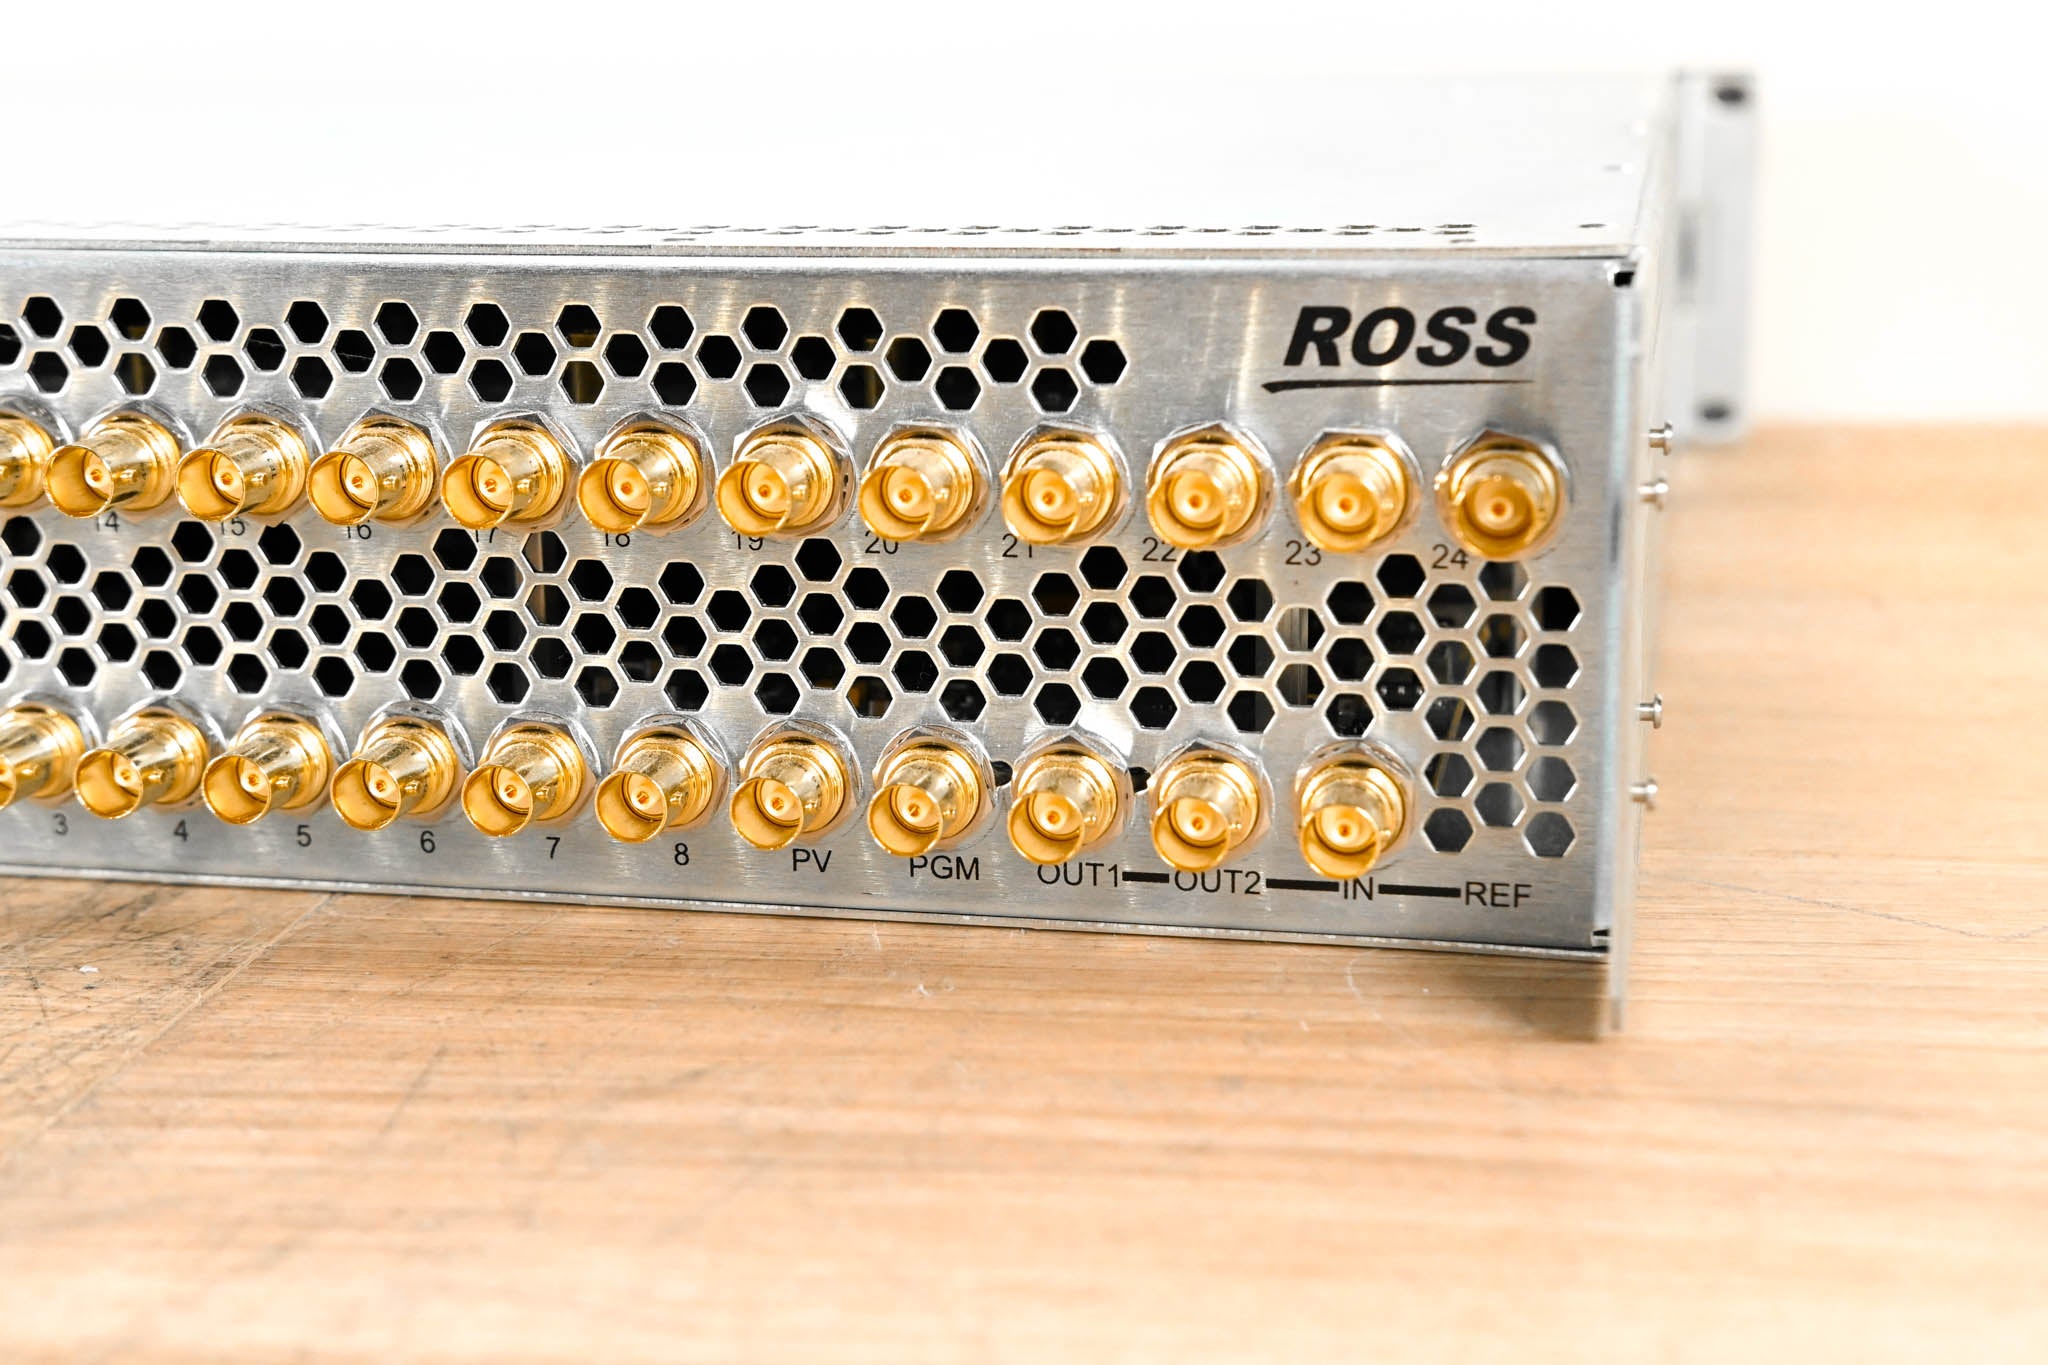 Ross Carbonite+ Frame 1 M/E Video Switcher with Carbonite 1M Panel